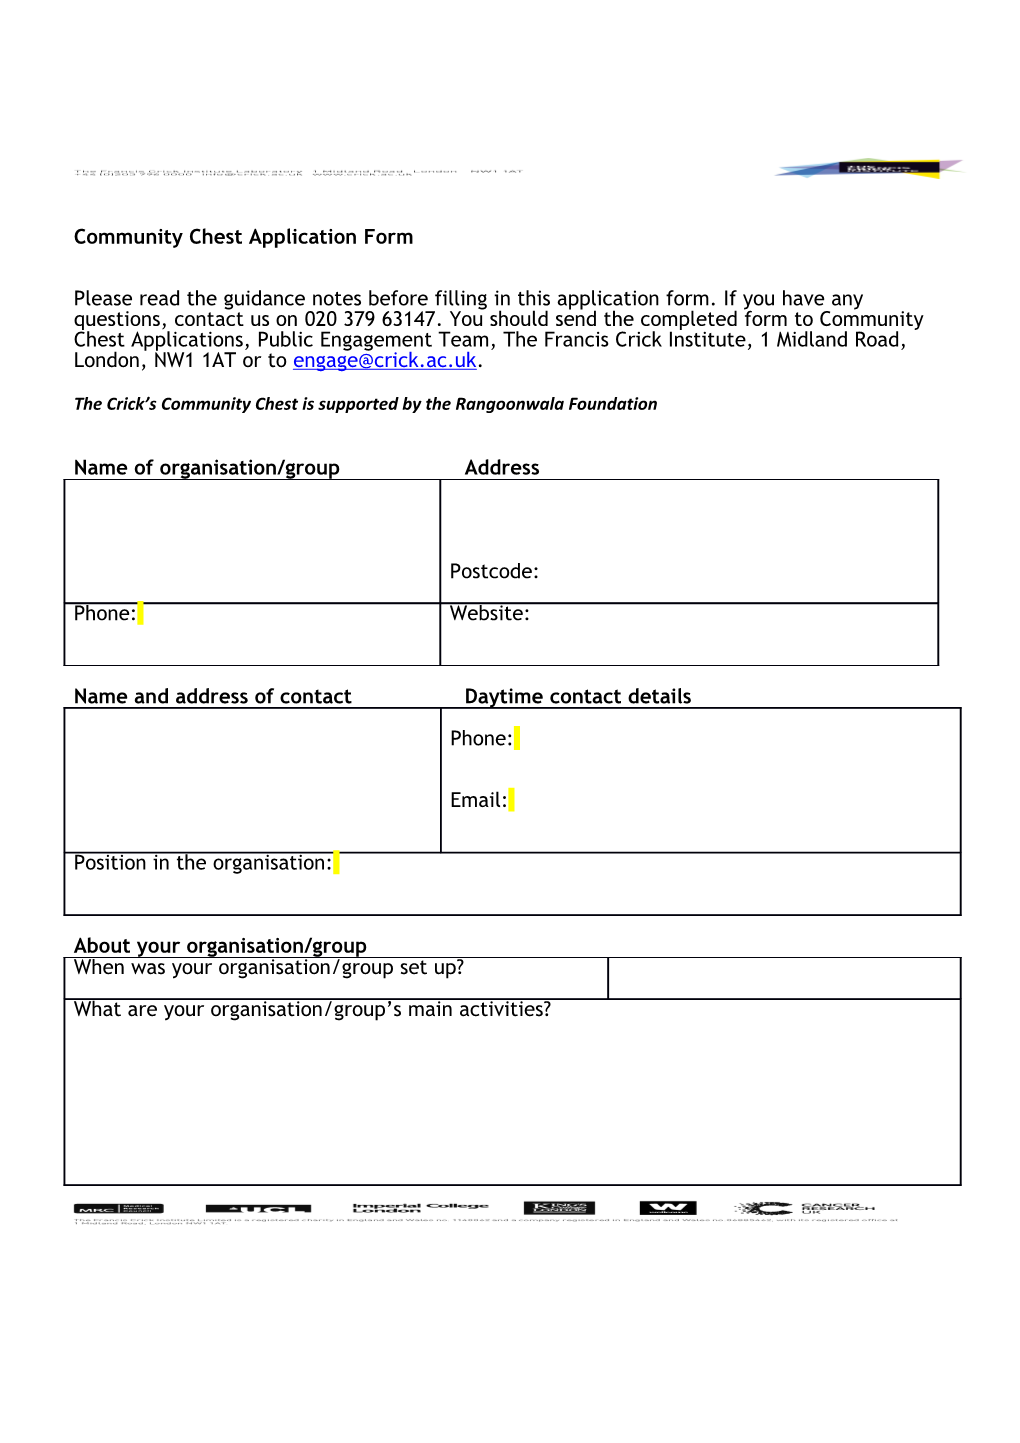 Community Chest Application Form